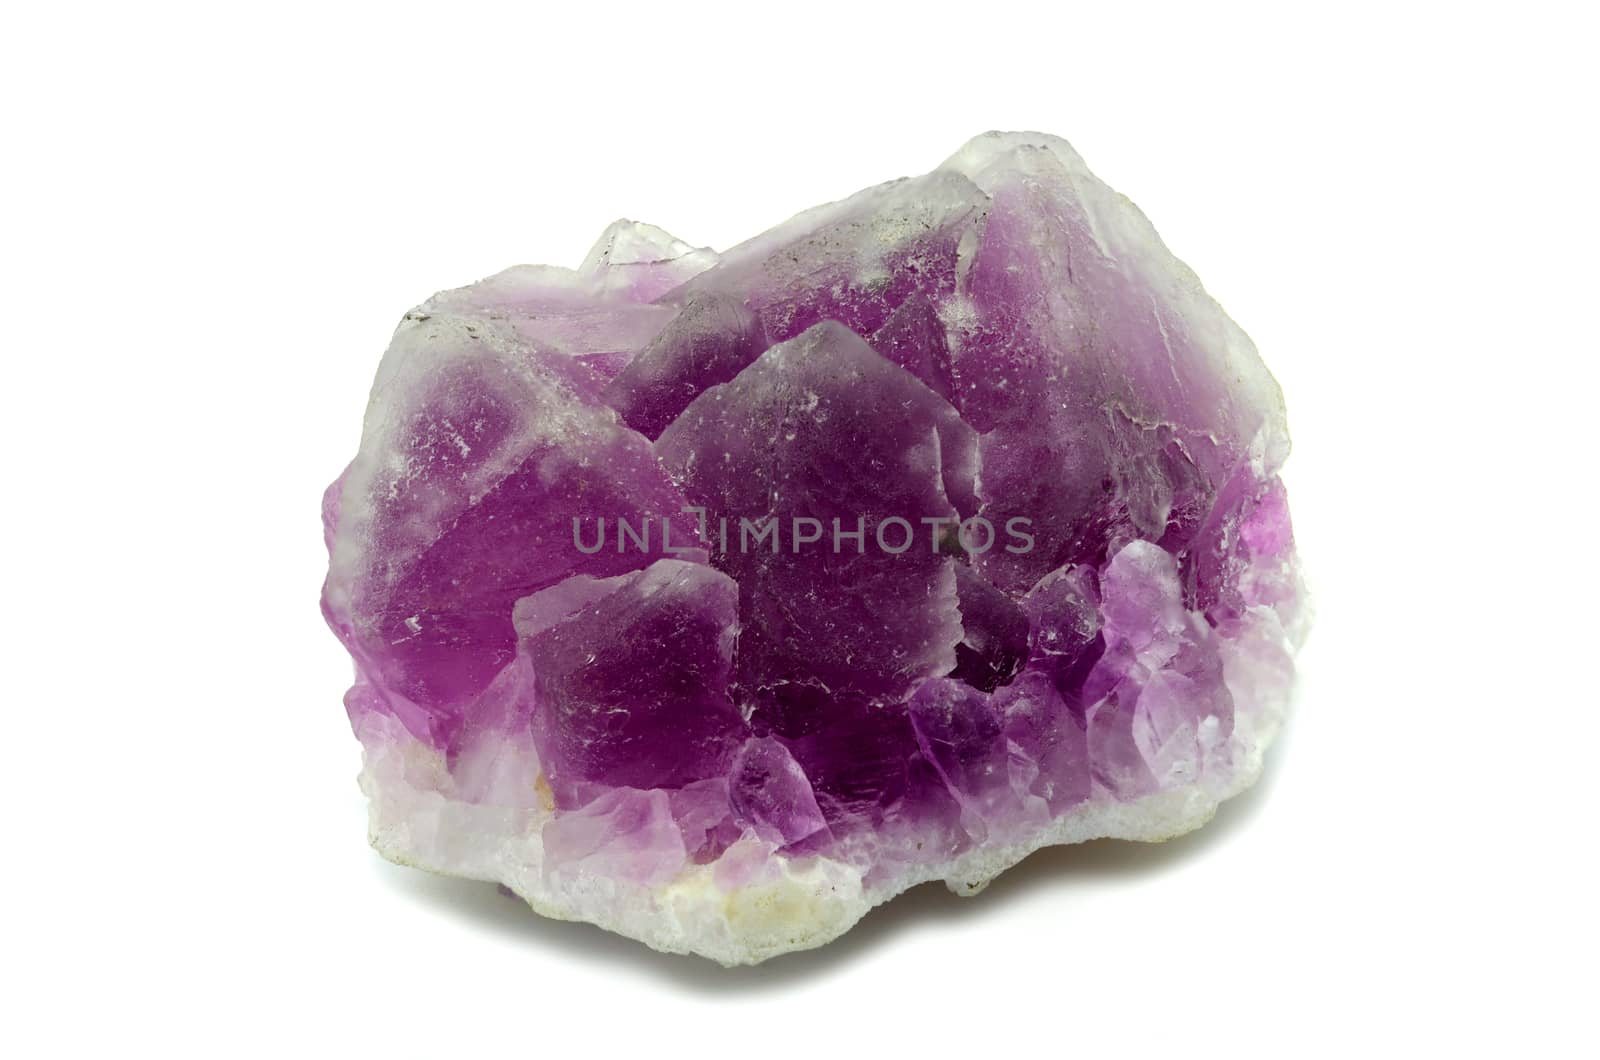 Sample of a beautiful Pink Fluorite nature specimen isolated on white background